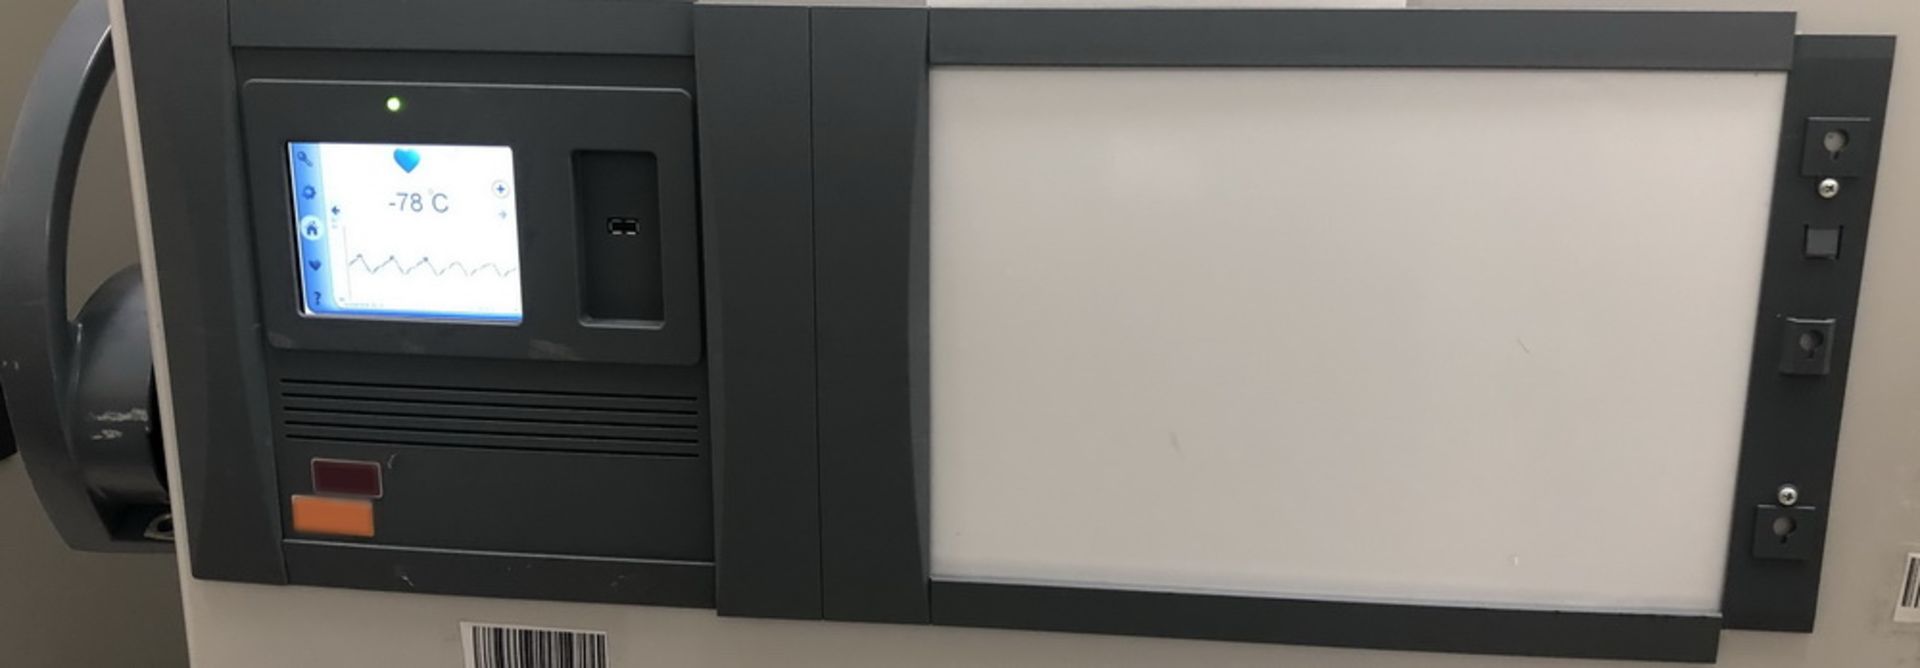 Thermo Fisher Scientific Freezer, Model UXF60086A60 - Image 2 of 4